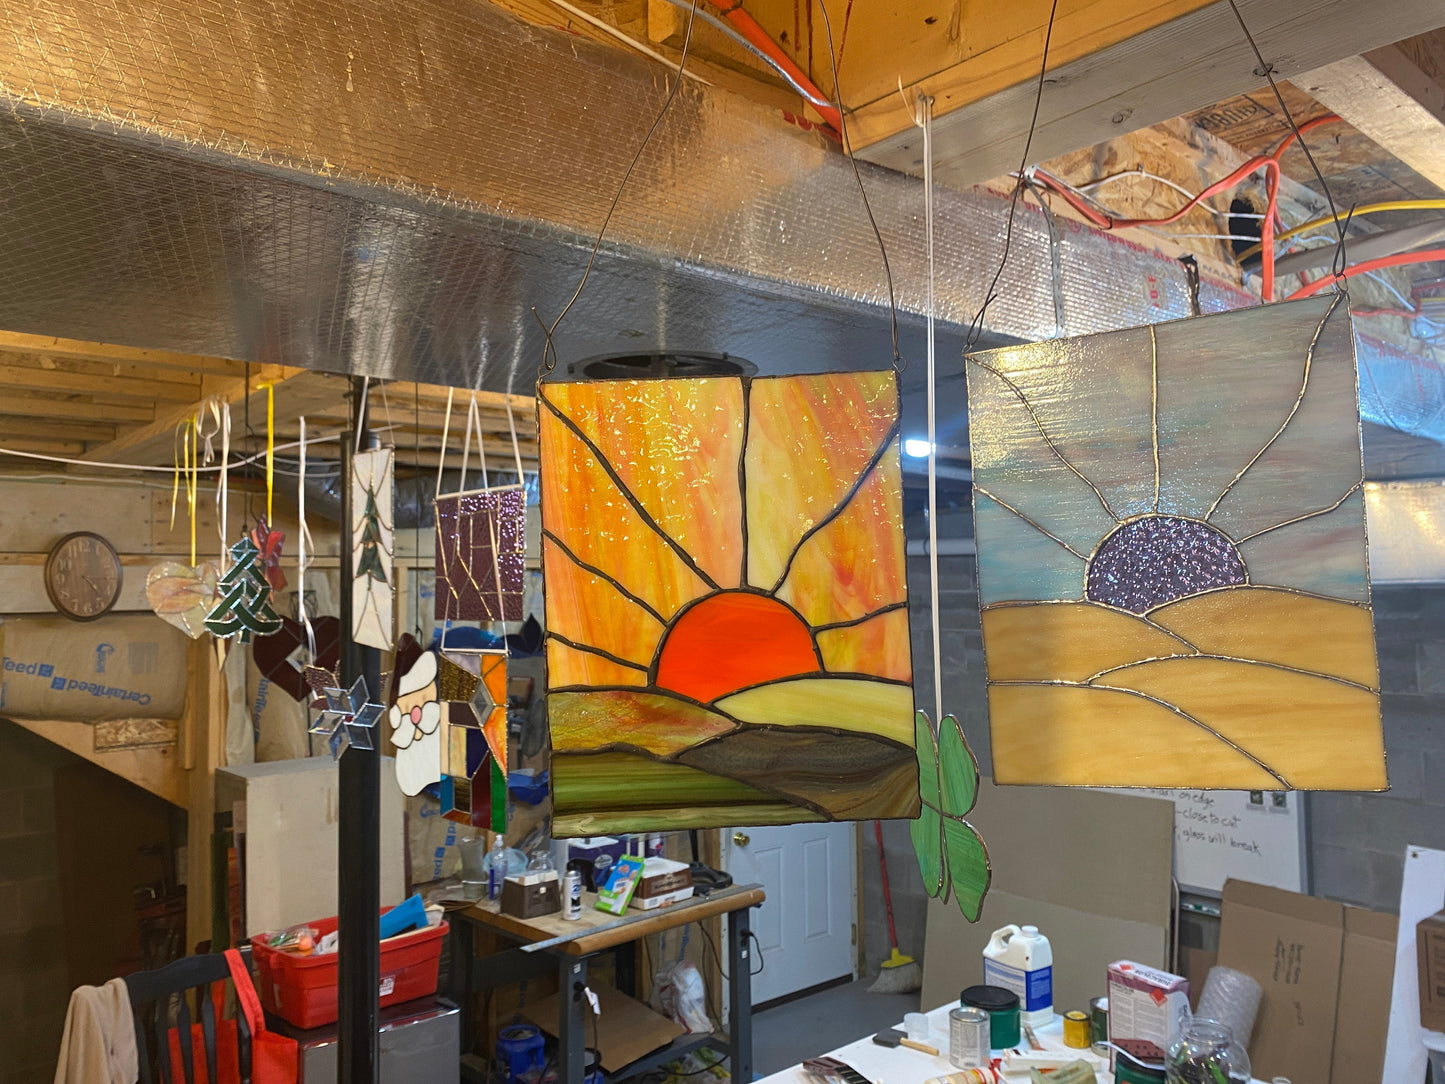 May 14th Stained Glass Workshop